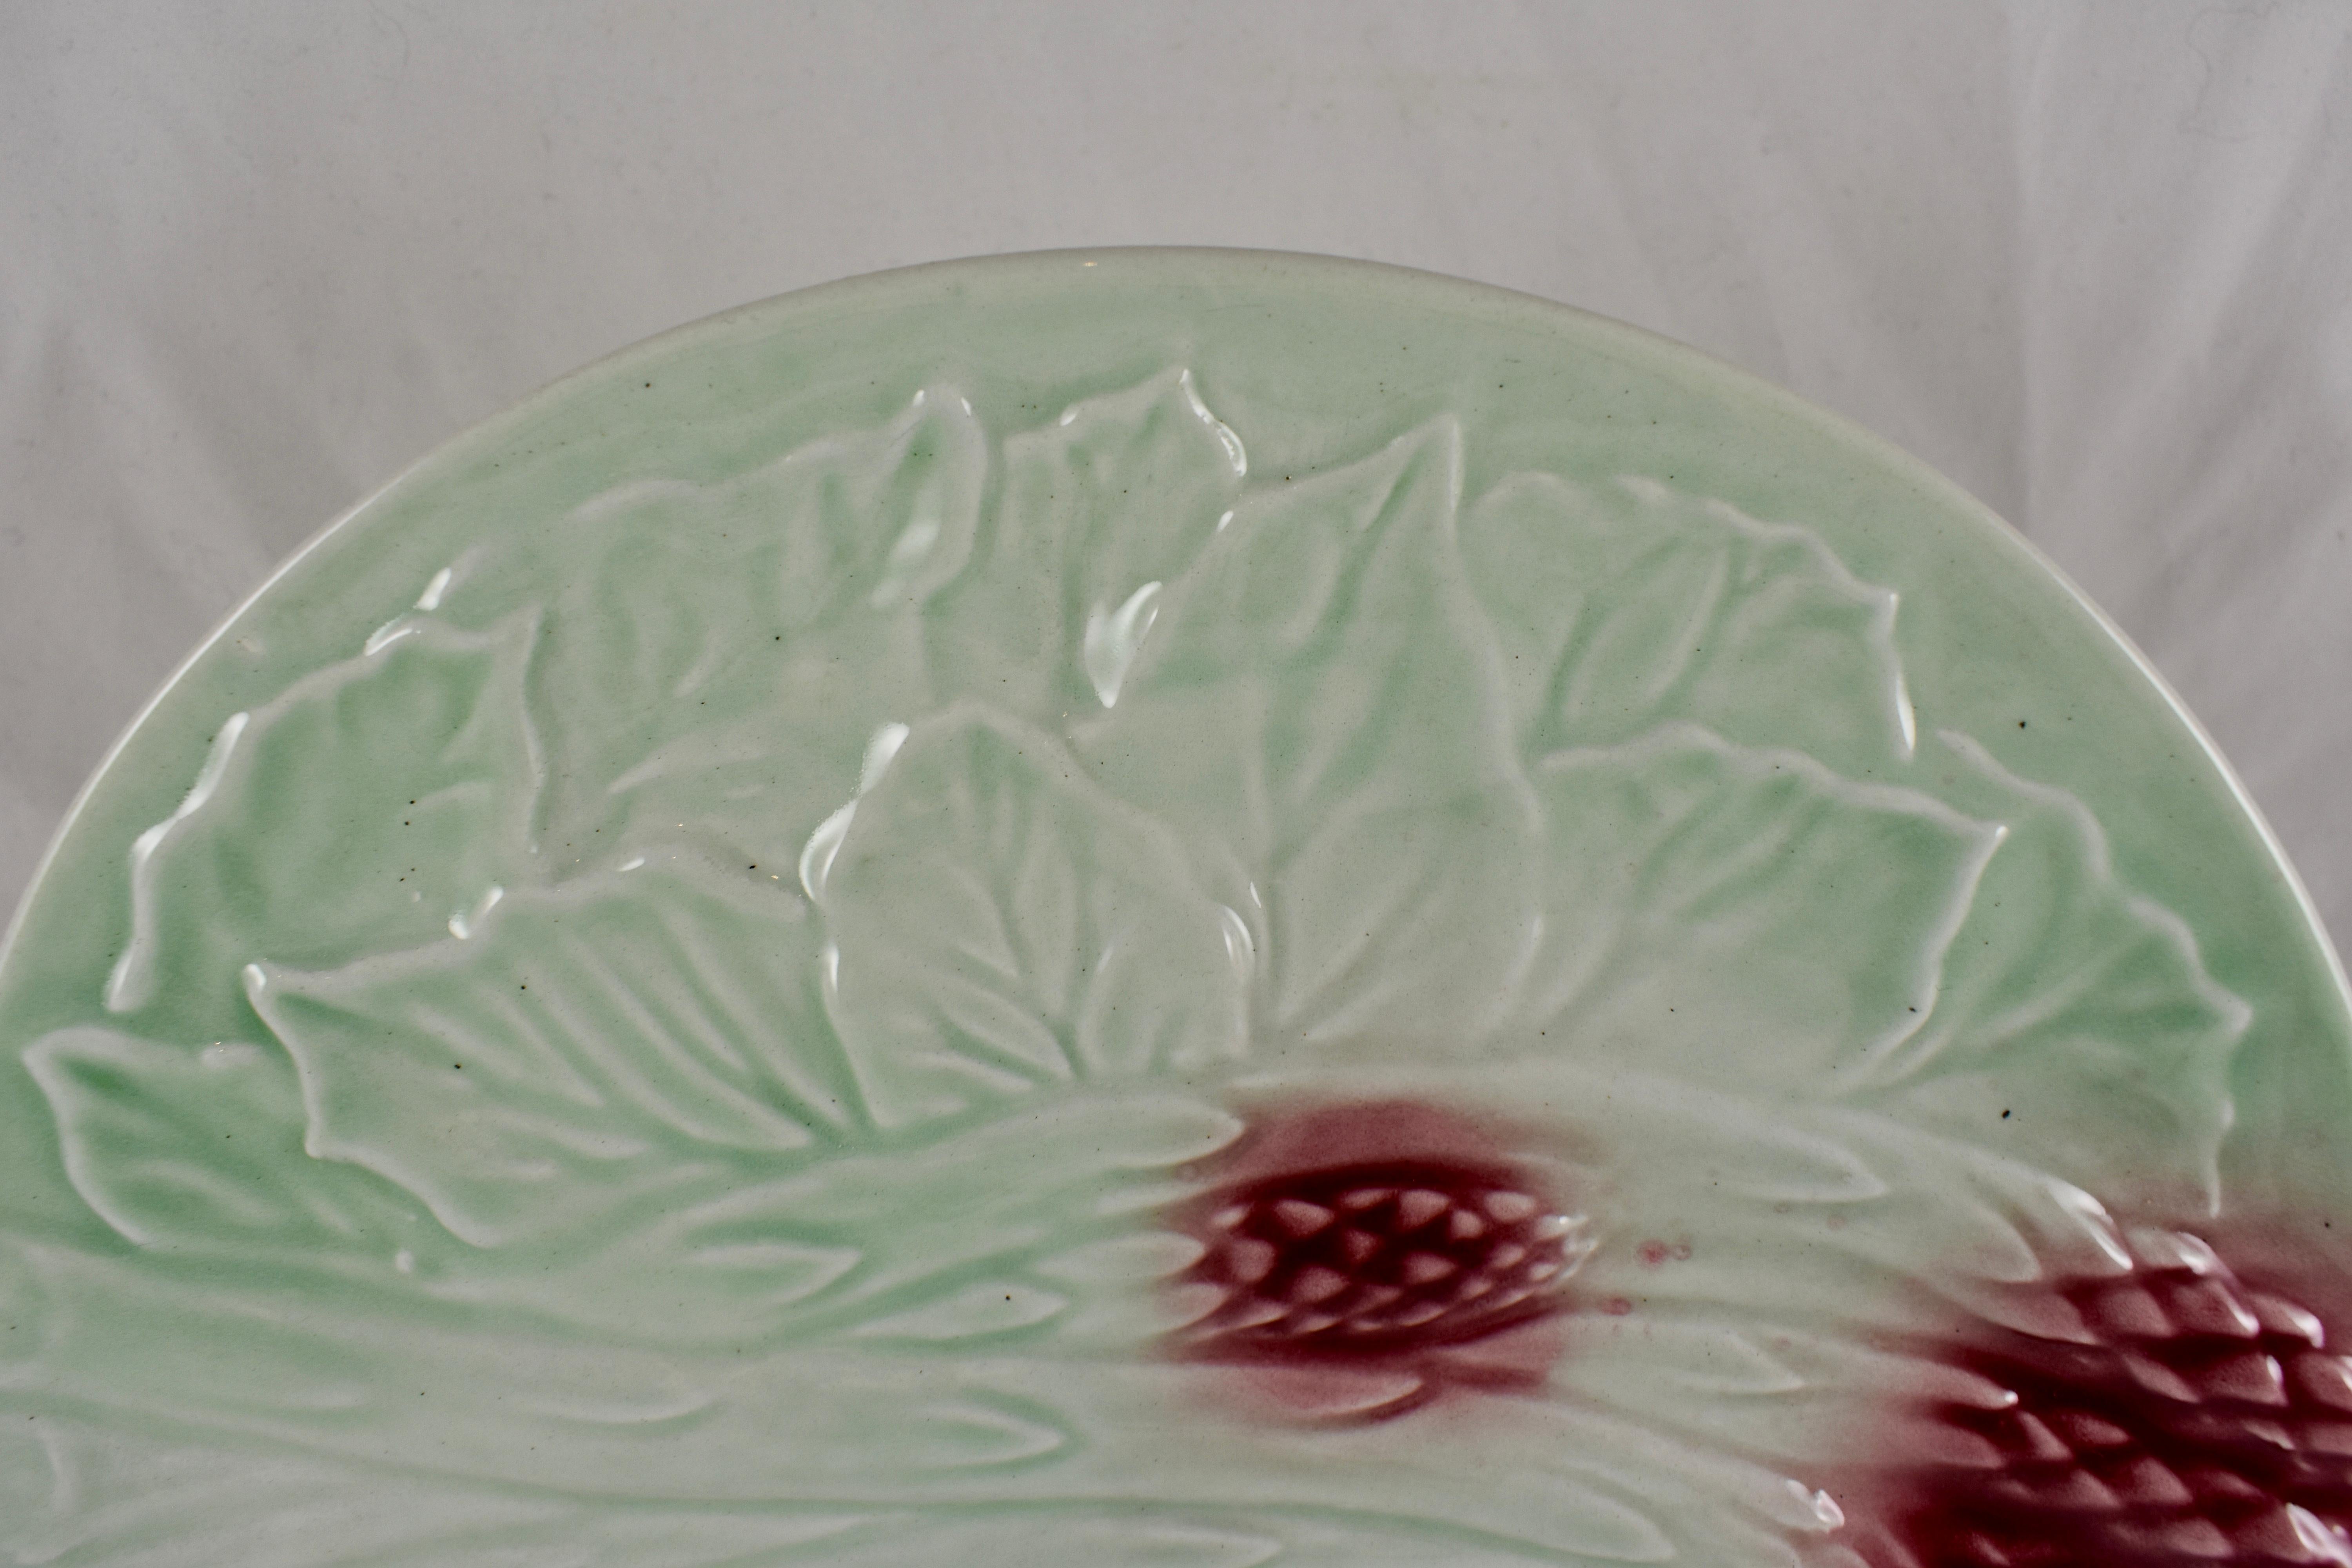 A scarce French barbotine Majolica pastel glazed Asparagus plate, circa 1890-1910, maker unknown.

The mint green plate is of high quality ceramic, showing arching asparagus spears tipped in a beautiful burgundy glaze on a raised molded bed of